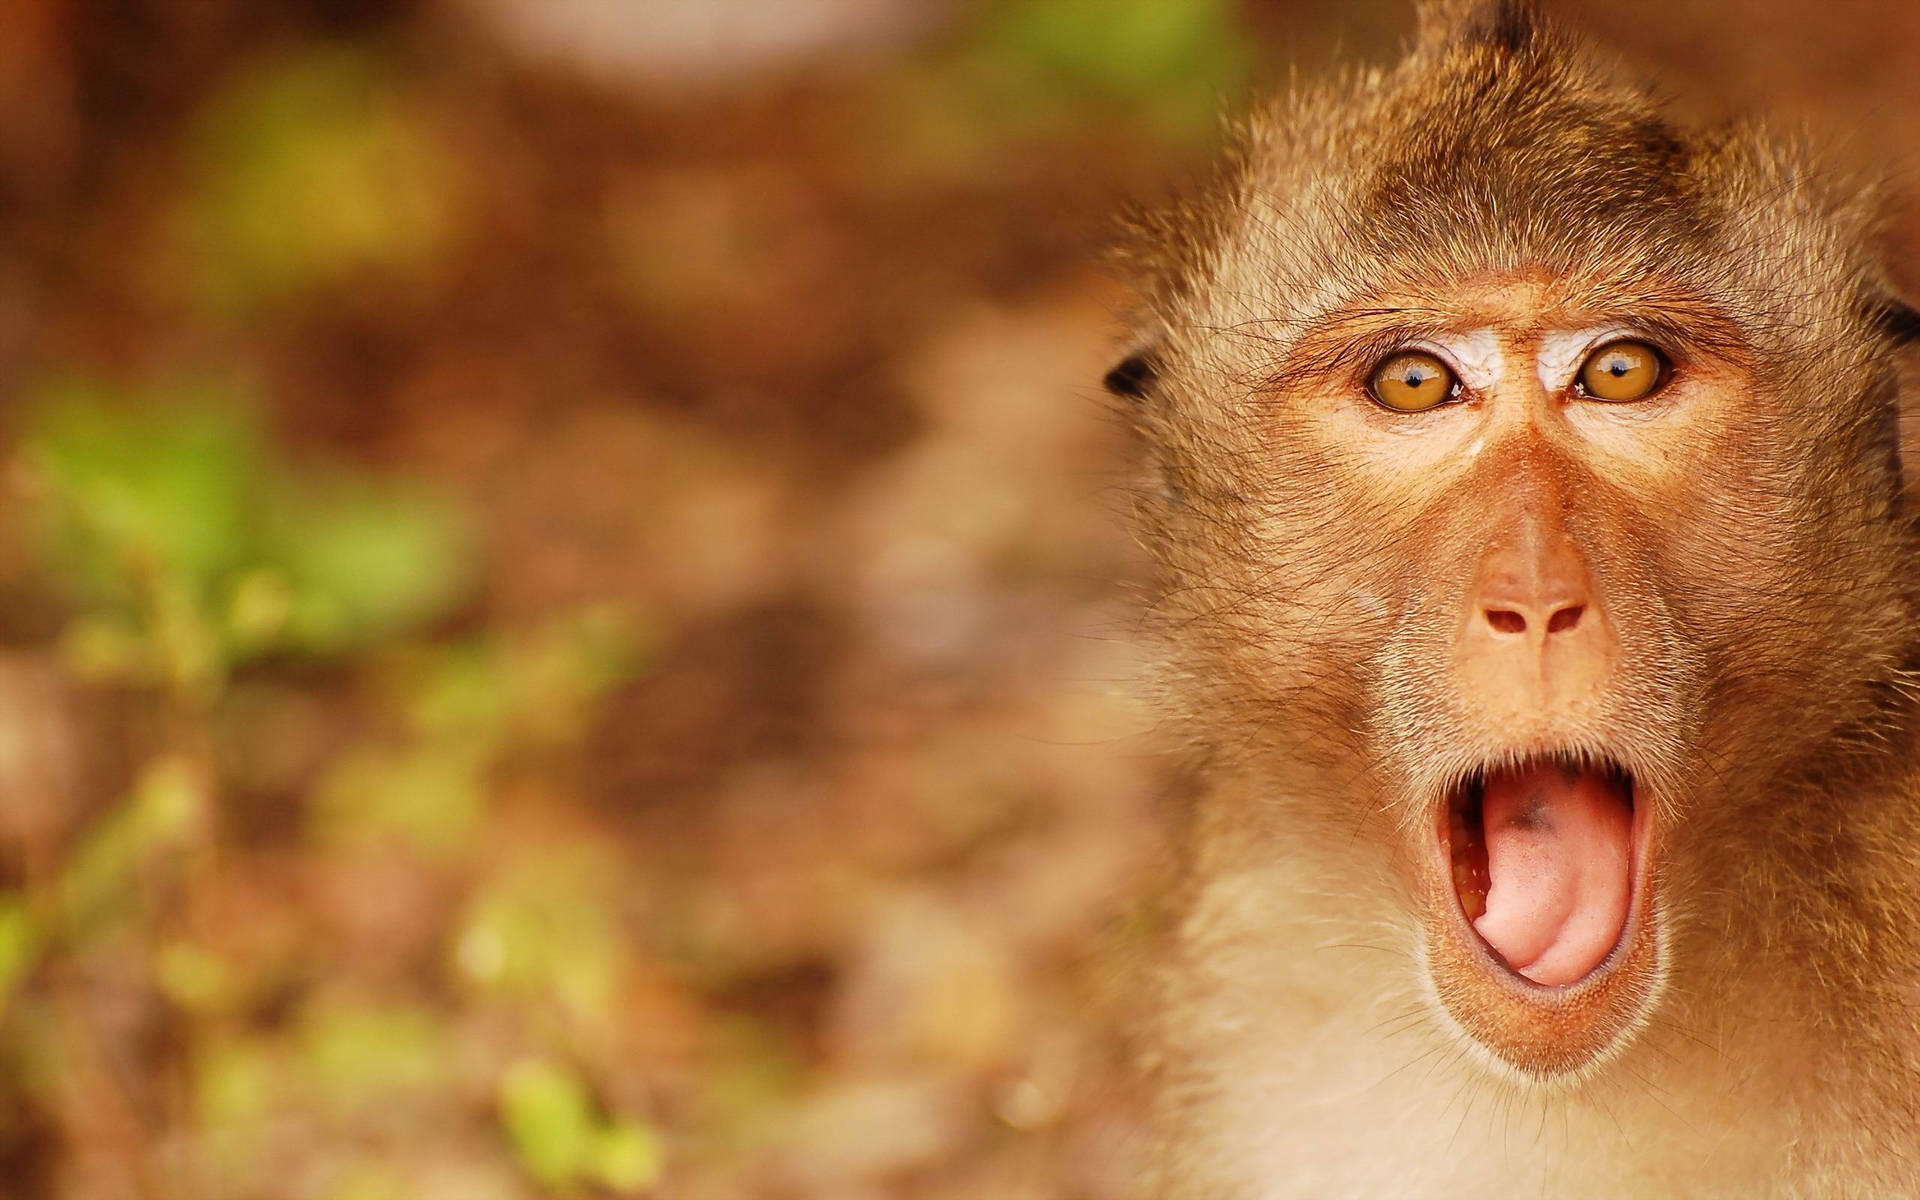 Funny Monkey Tongue Out